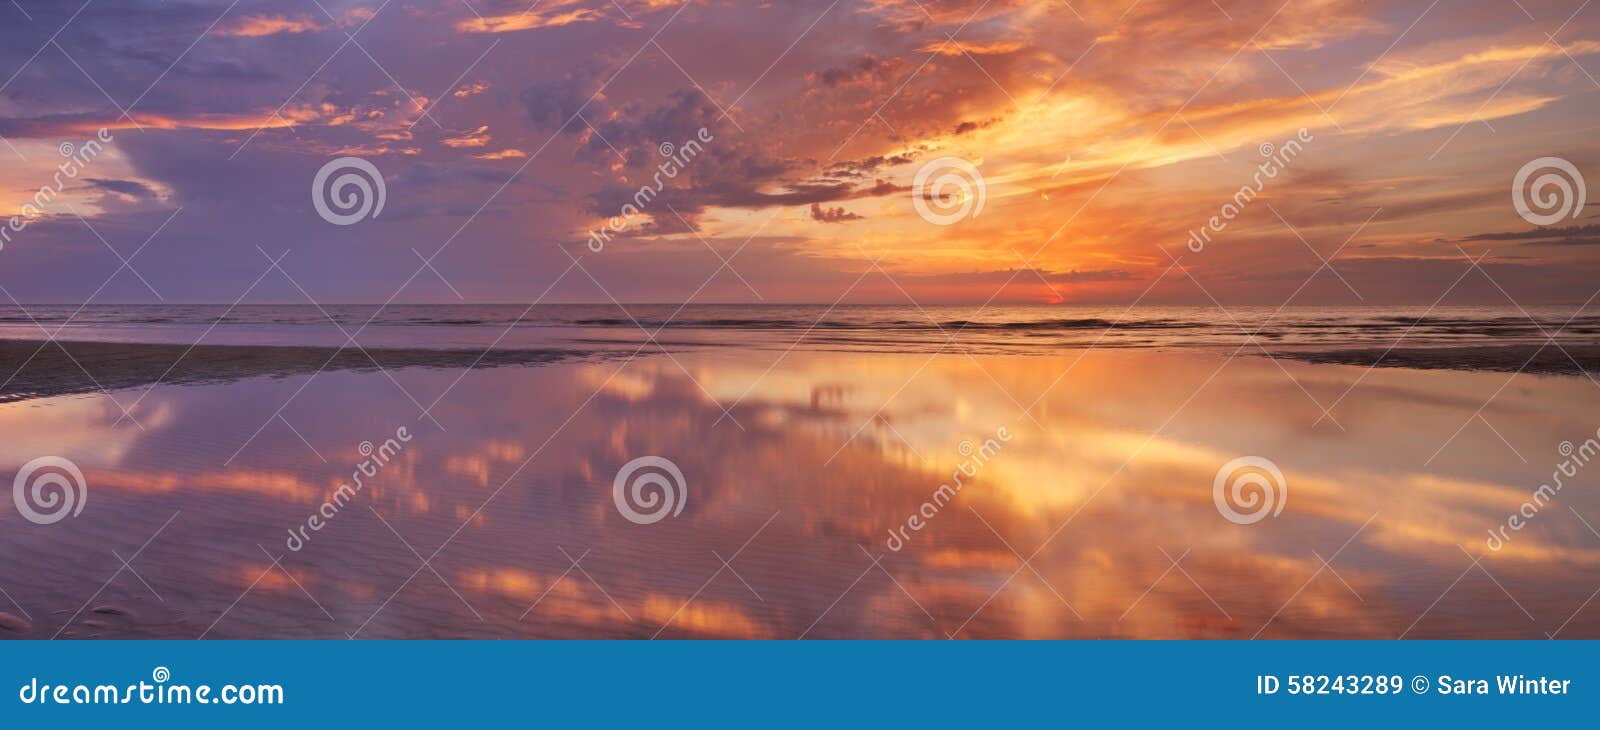 sunset reflections on the beach, texel island, the netherlands